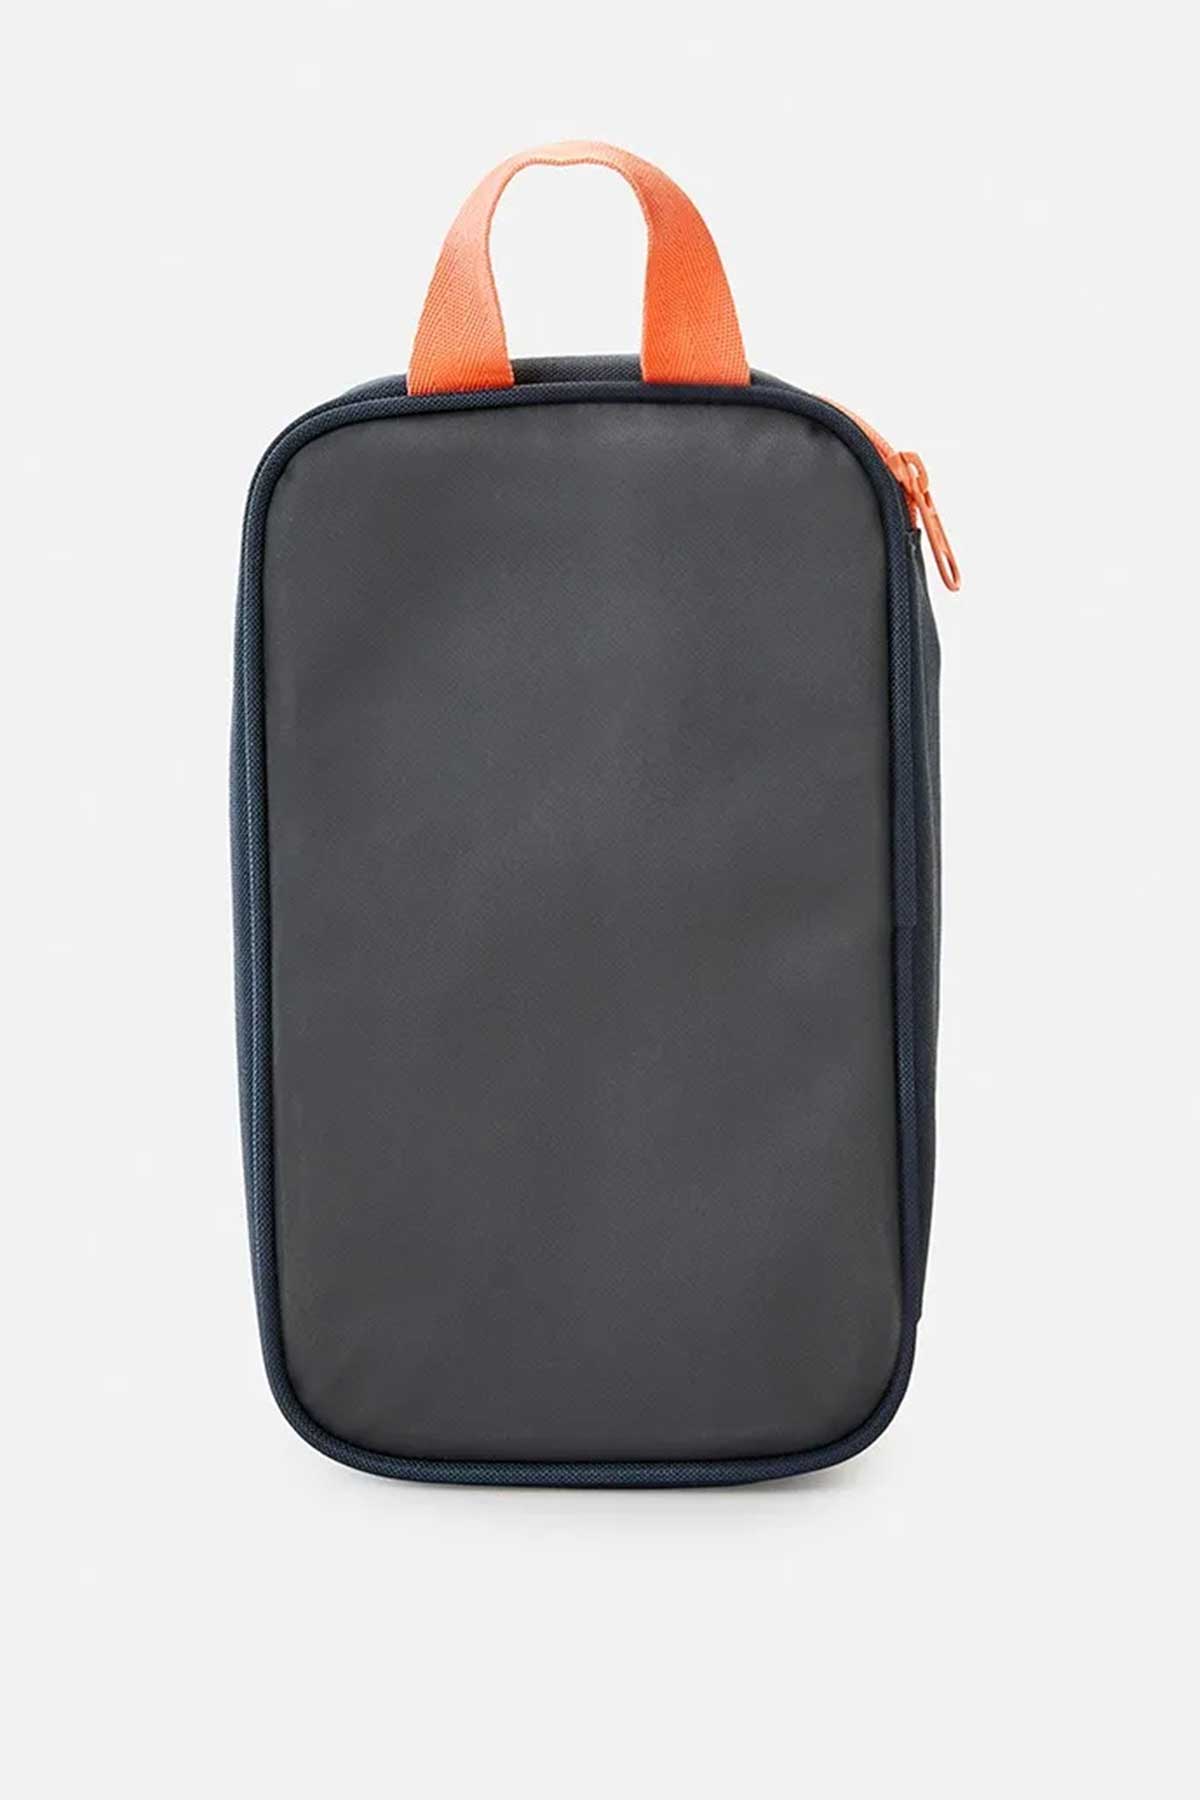 Rip Curl Lunch Box Mixed navy/peach back